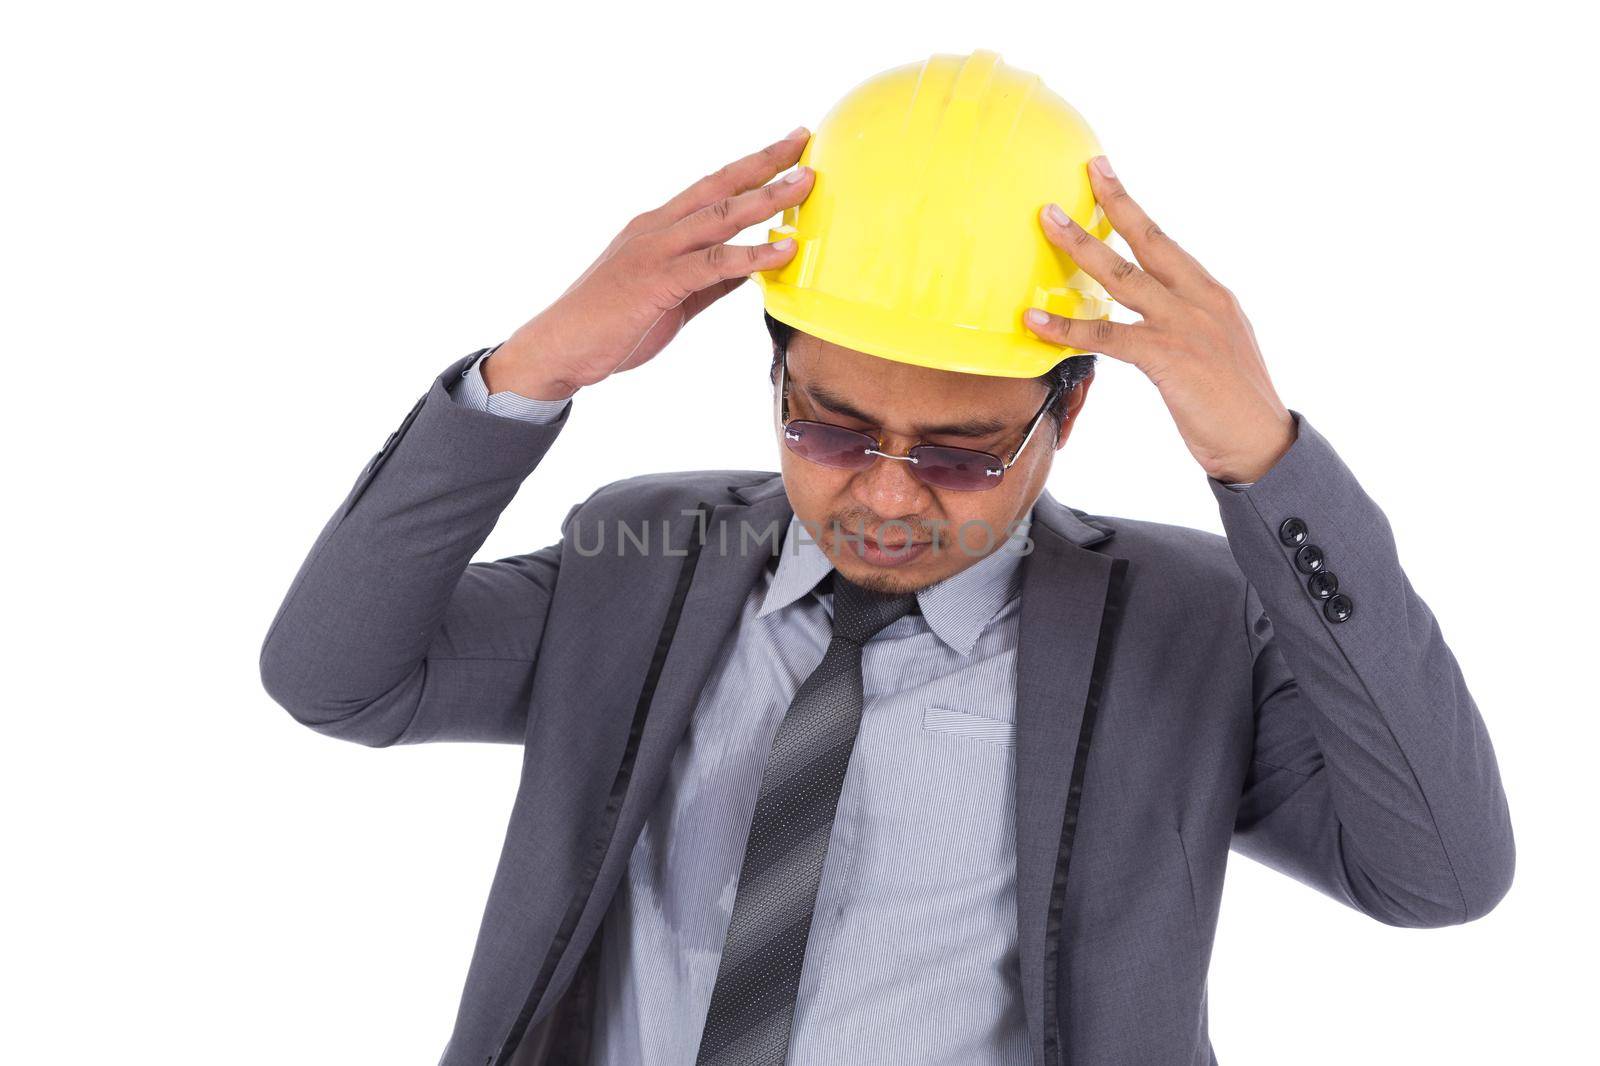 engineer in suit with headache and problems isolated on a white background